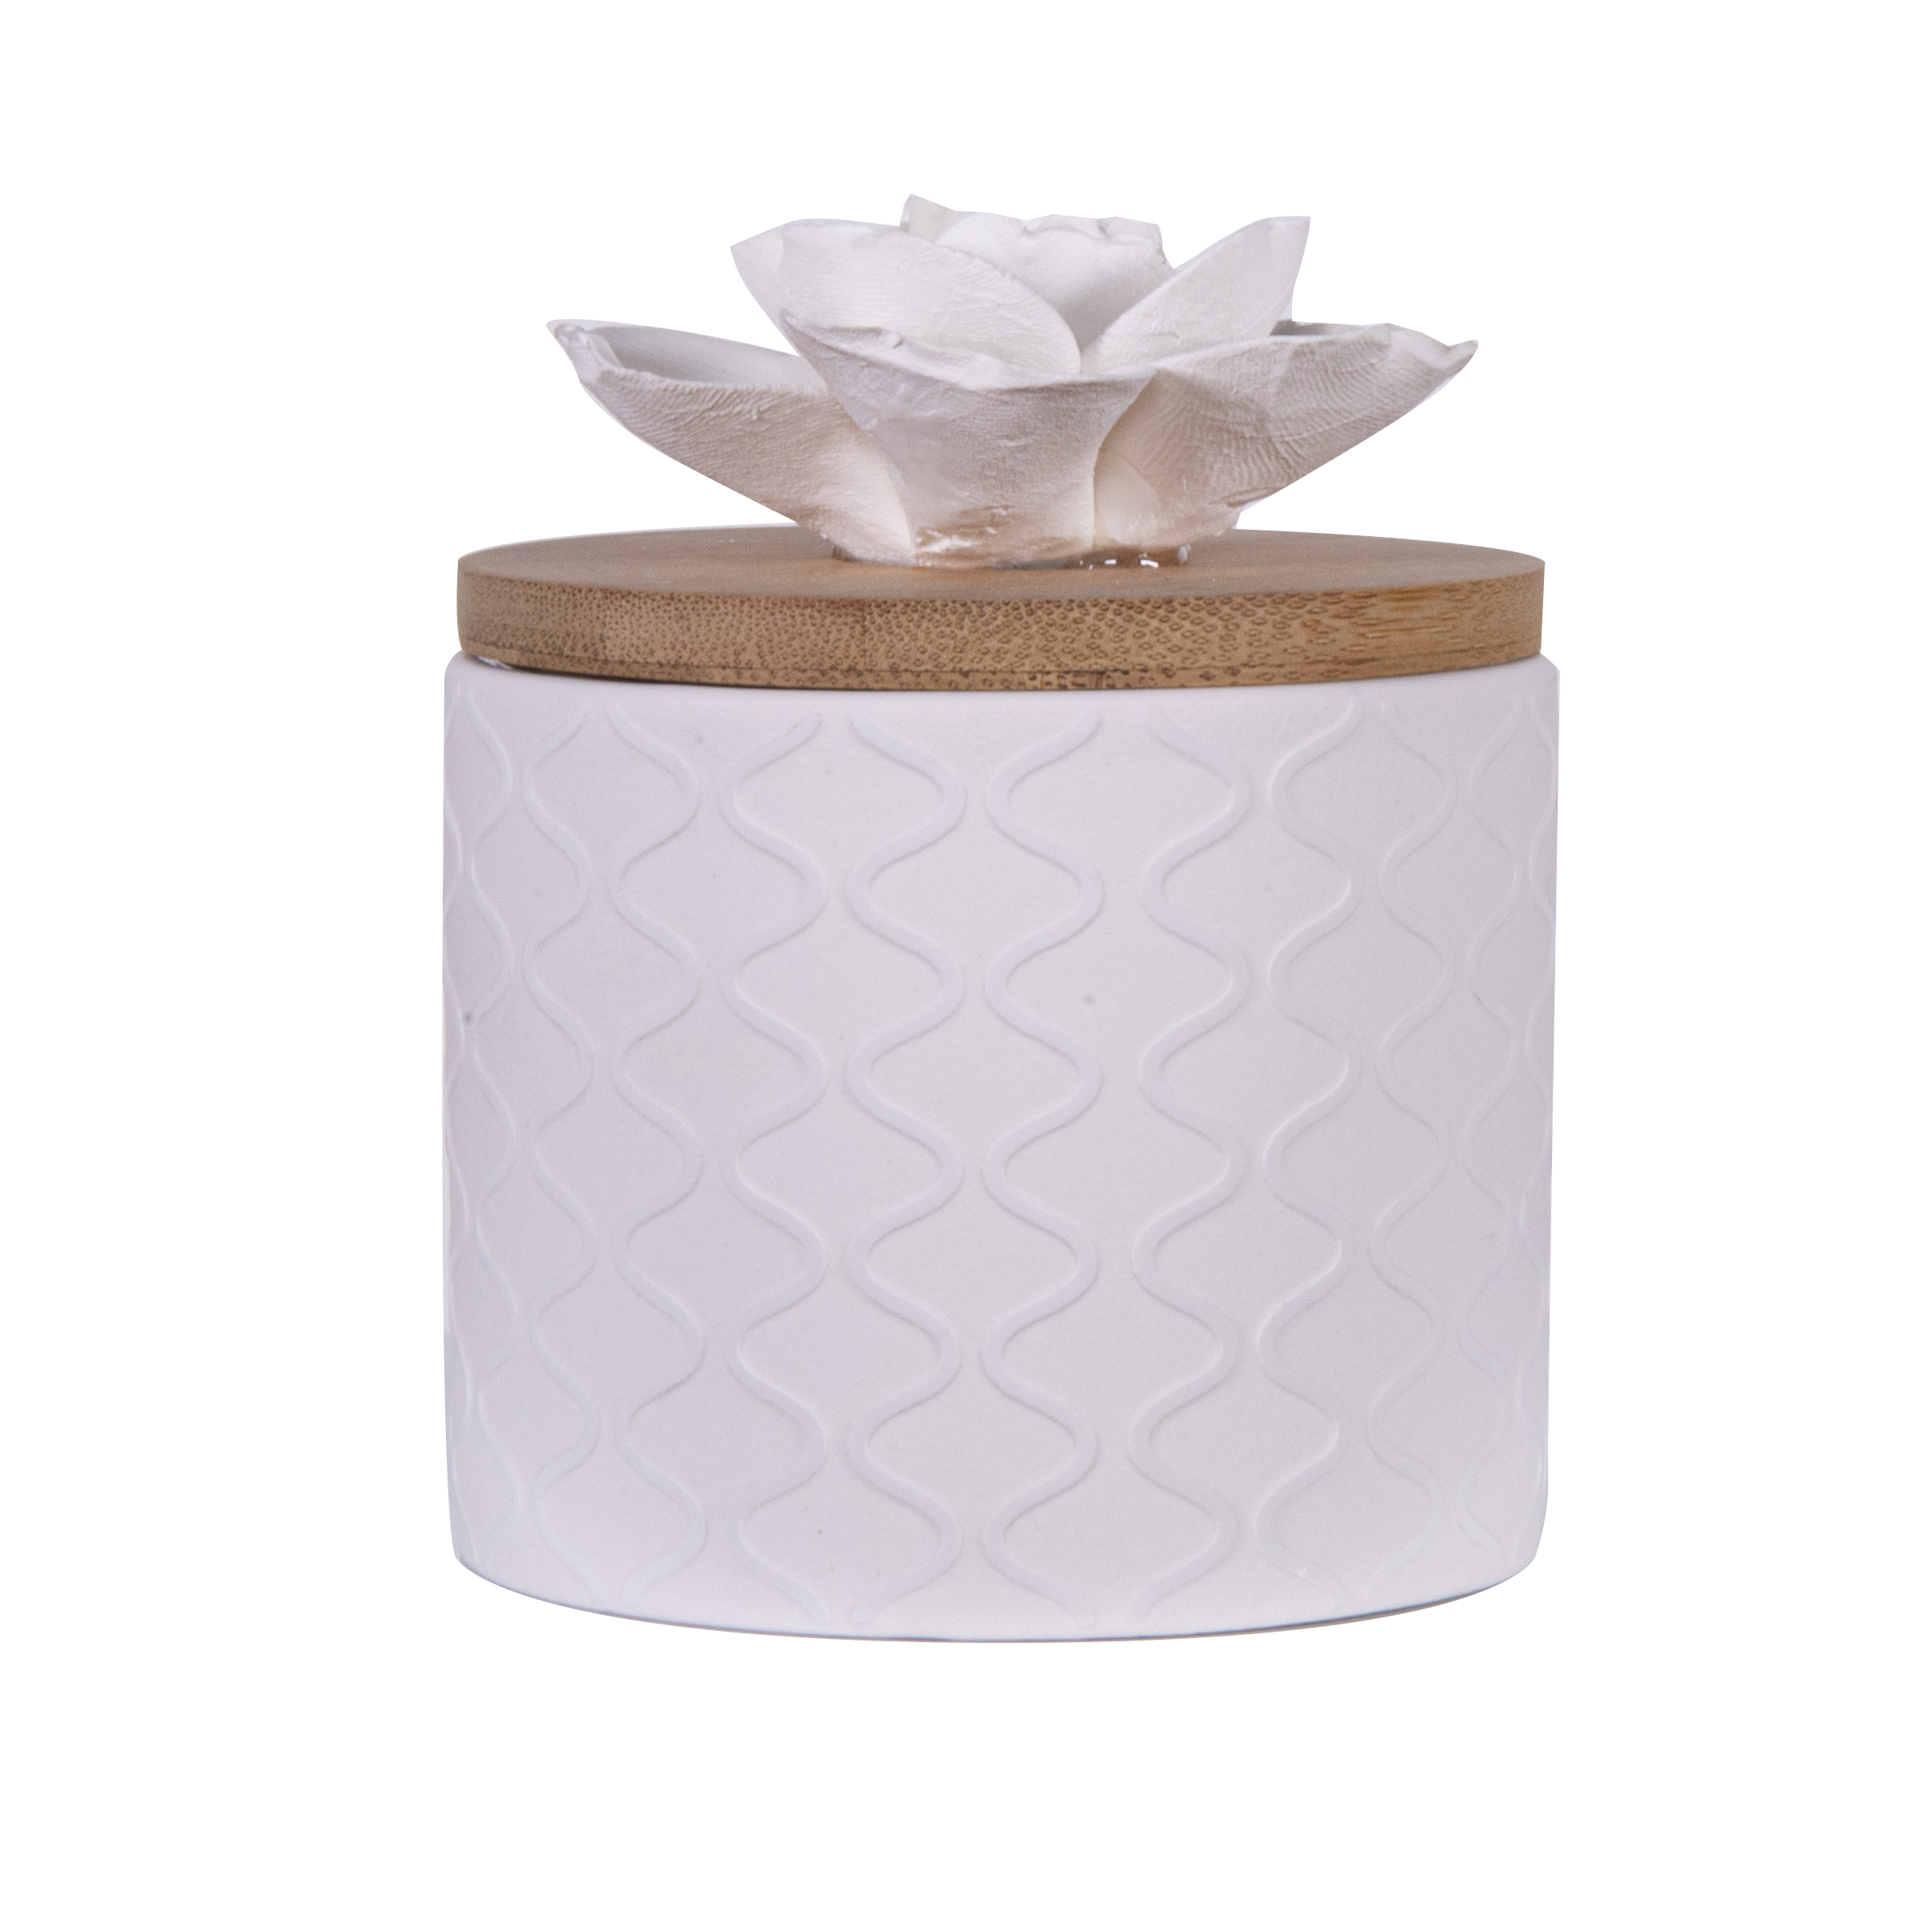 Better Homes & Gardens Wicking Ceramic Diffuser, Floral - image 1 of 8